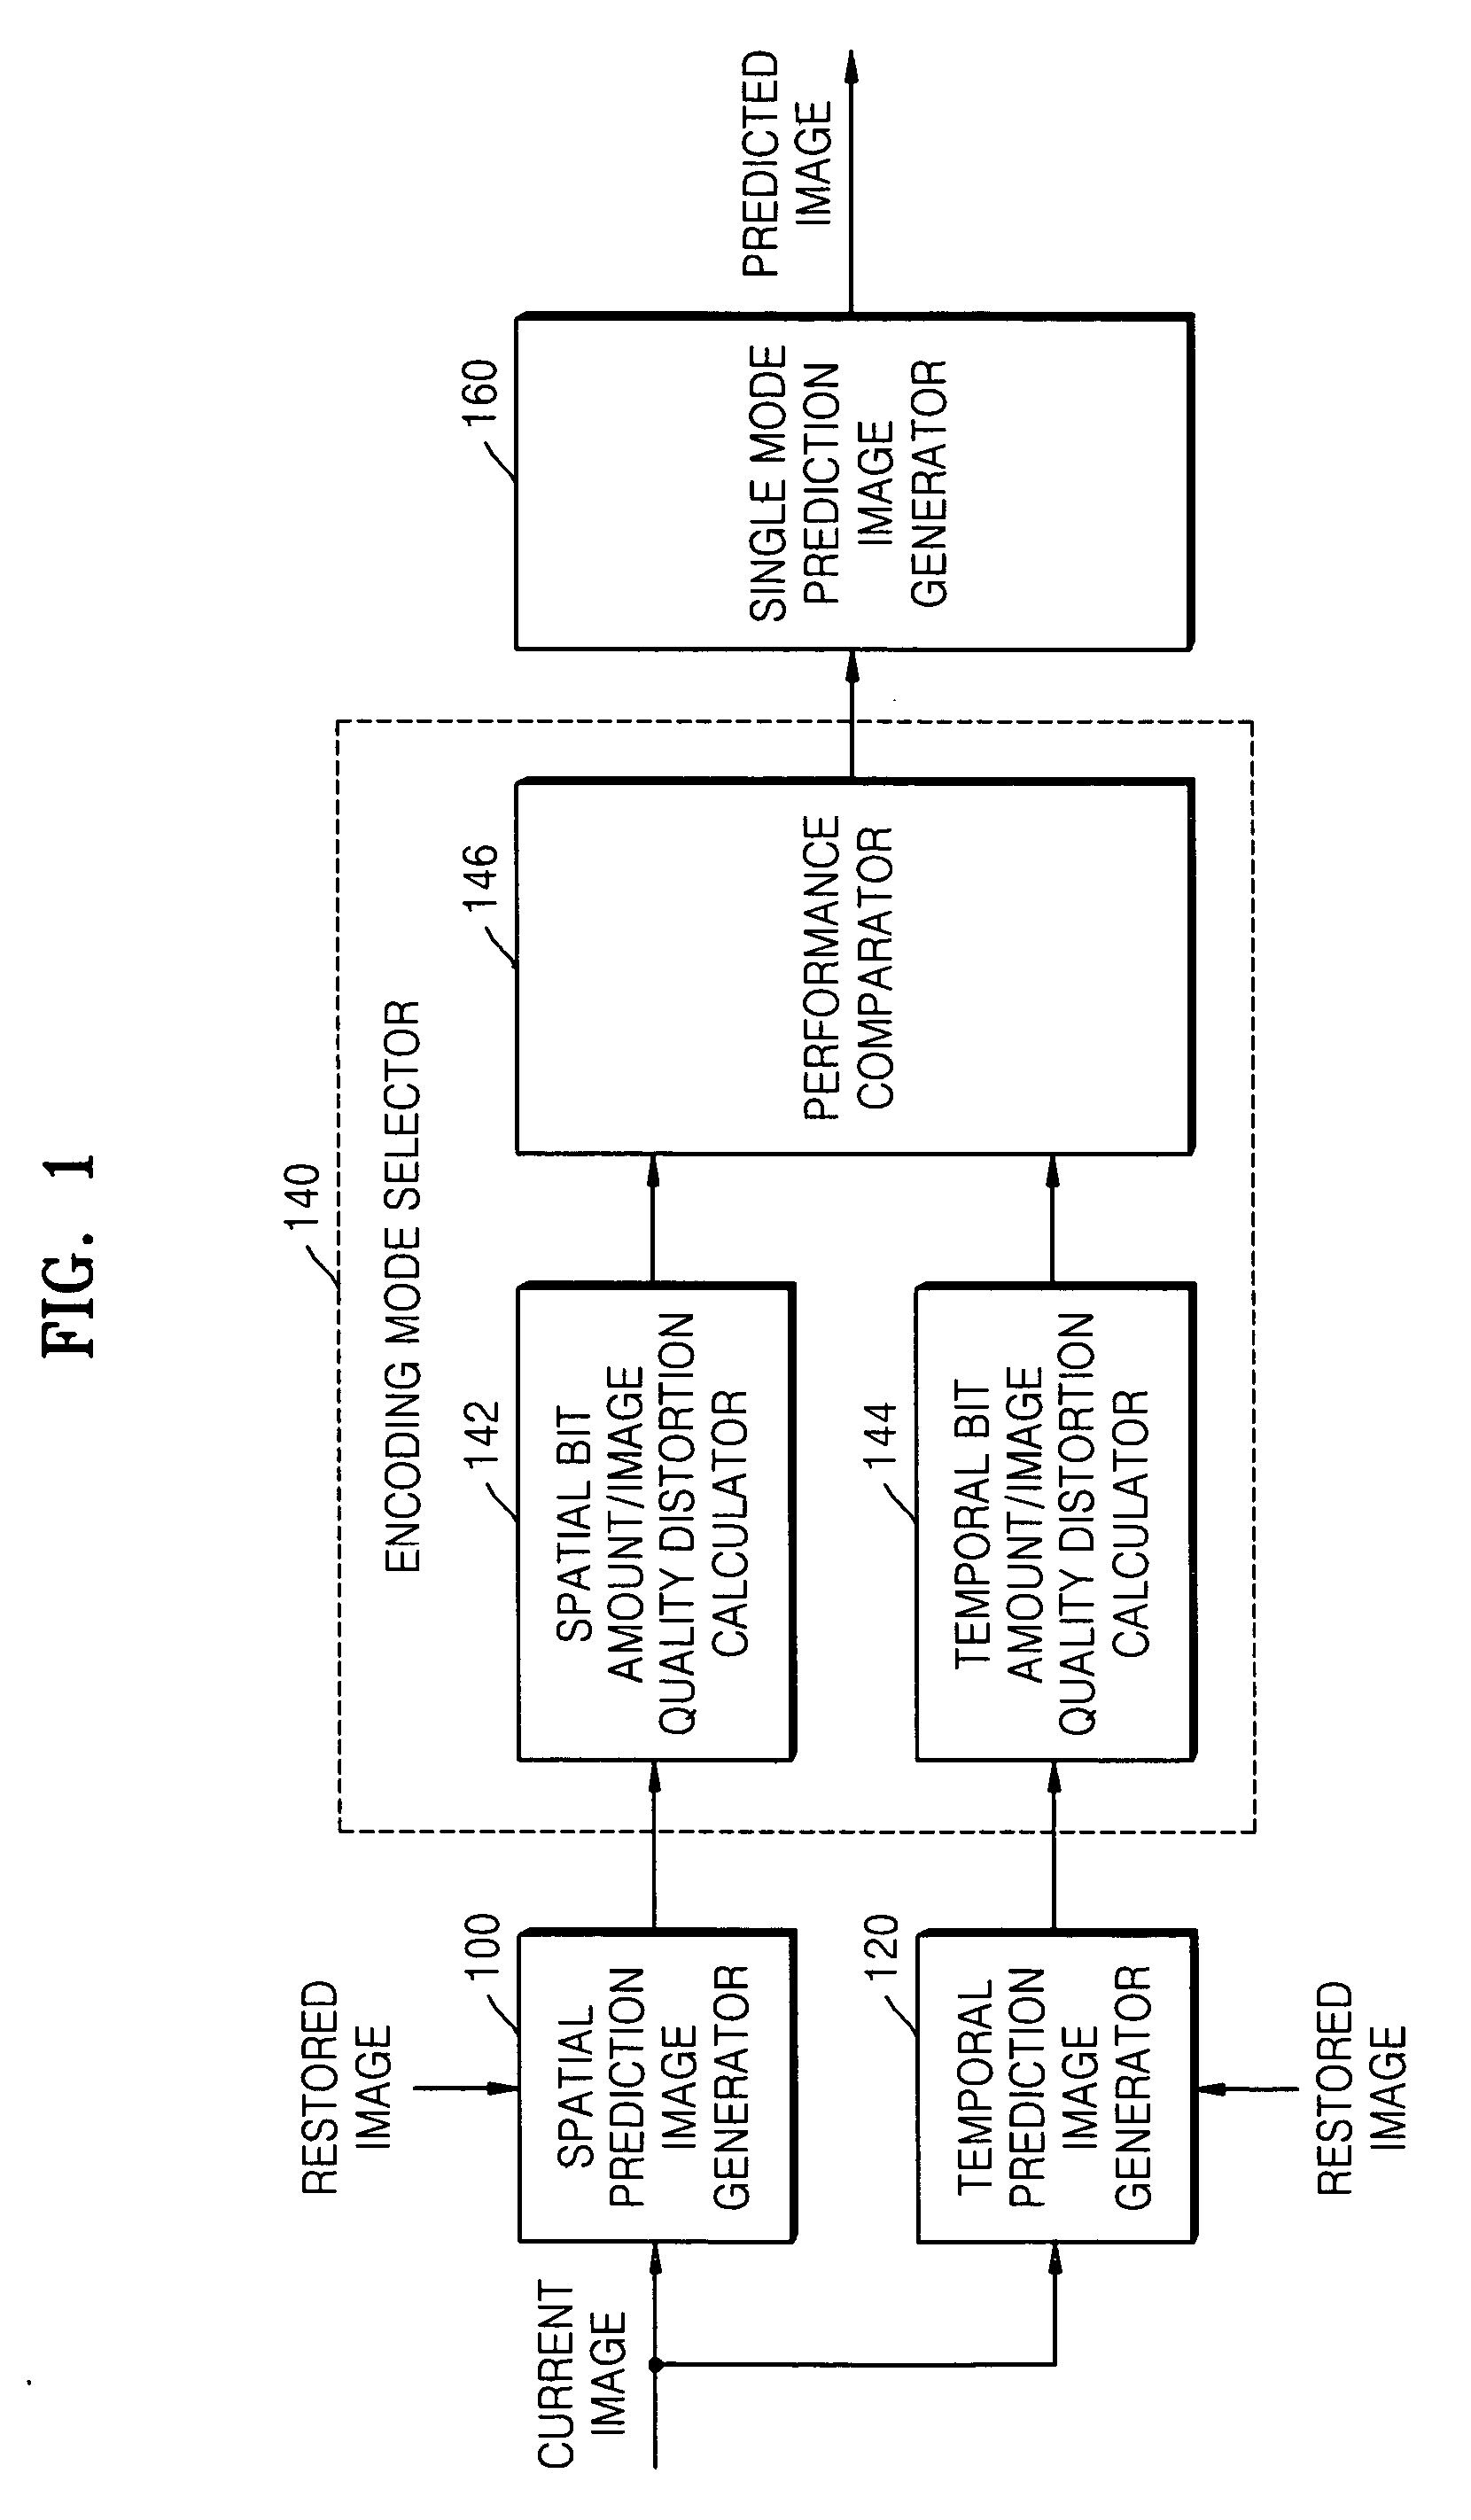 Method, medium, and apparatus encoding and/or decoding an image using the same coding mode across components